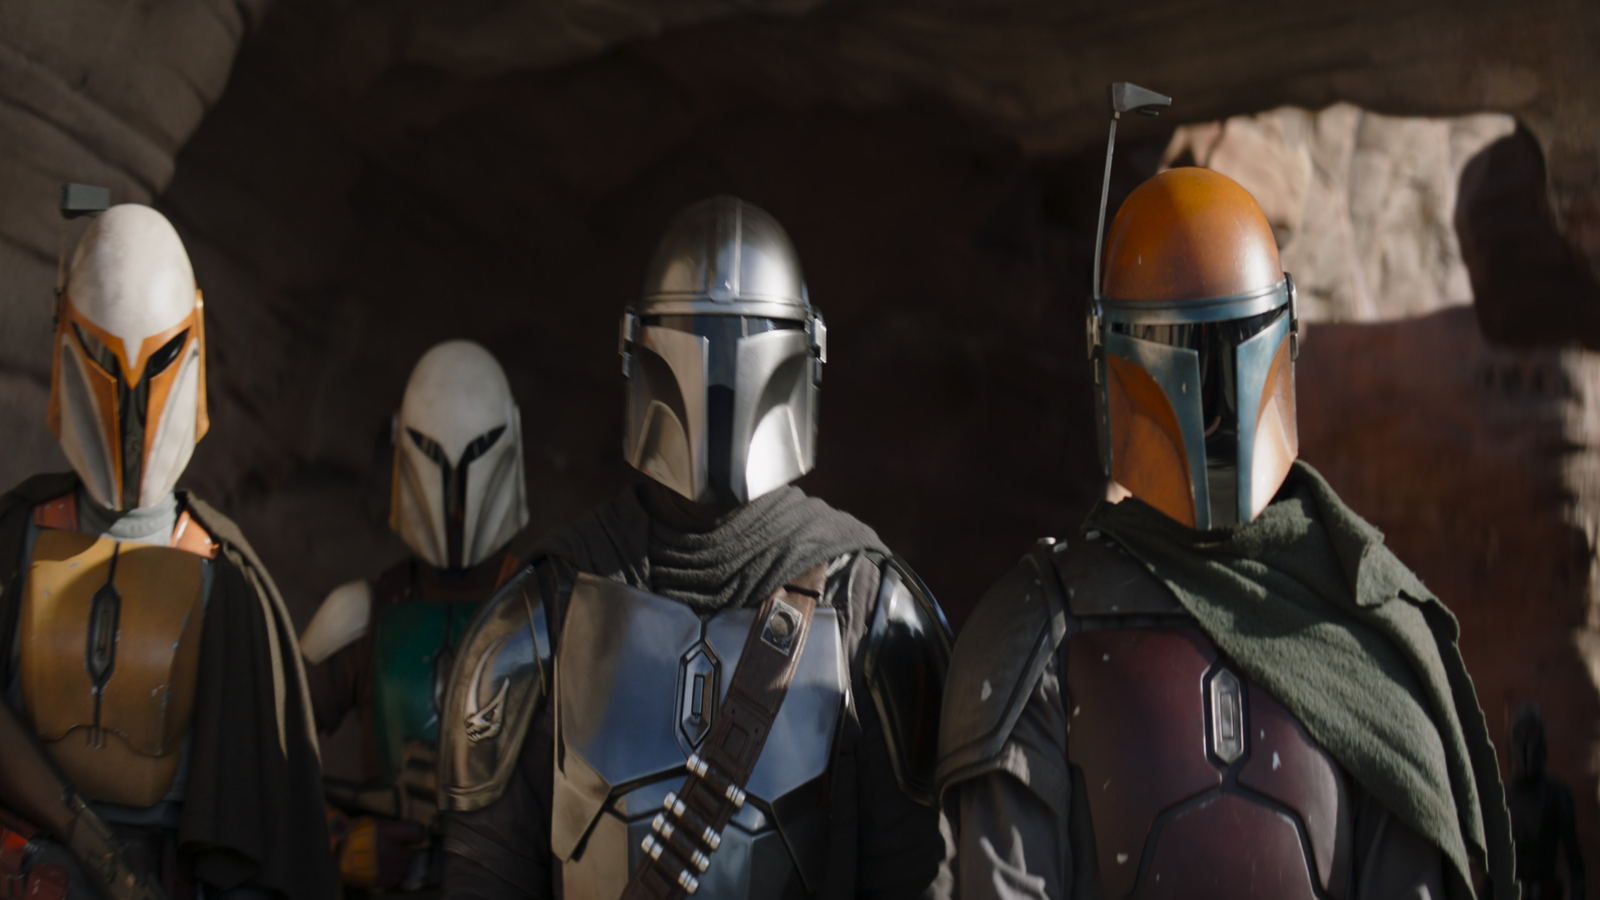 When does The Mandalorian Series Take Place?